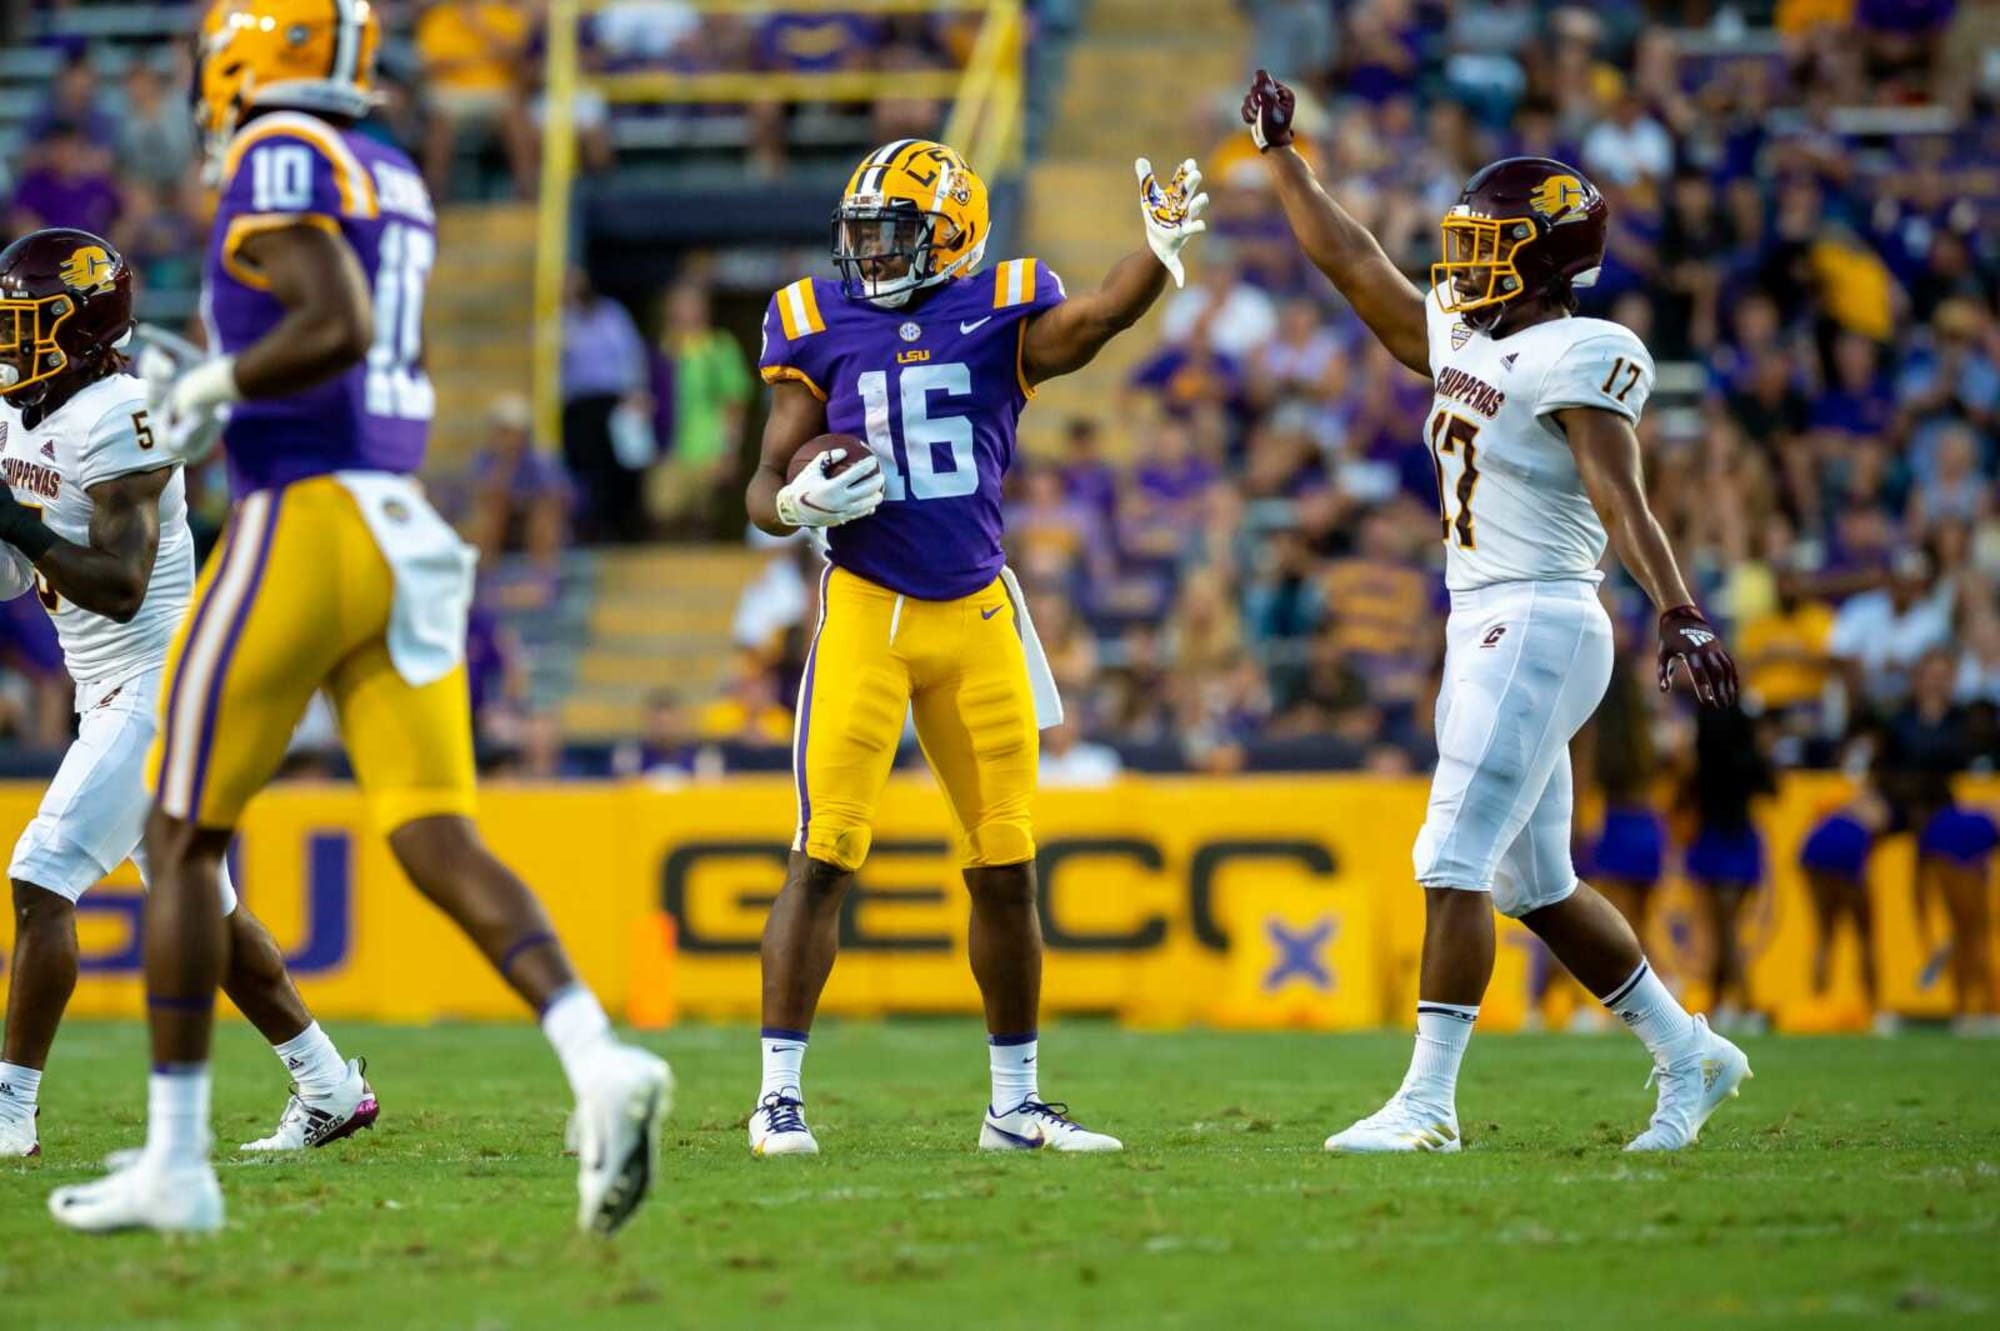 LSU Game Today LSU vs Mississippi State injury report, schedule, live Stream, TV channel and betting preview for Week 4 college football game